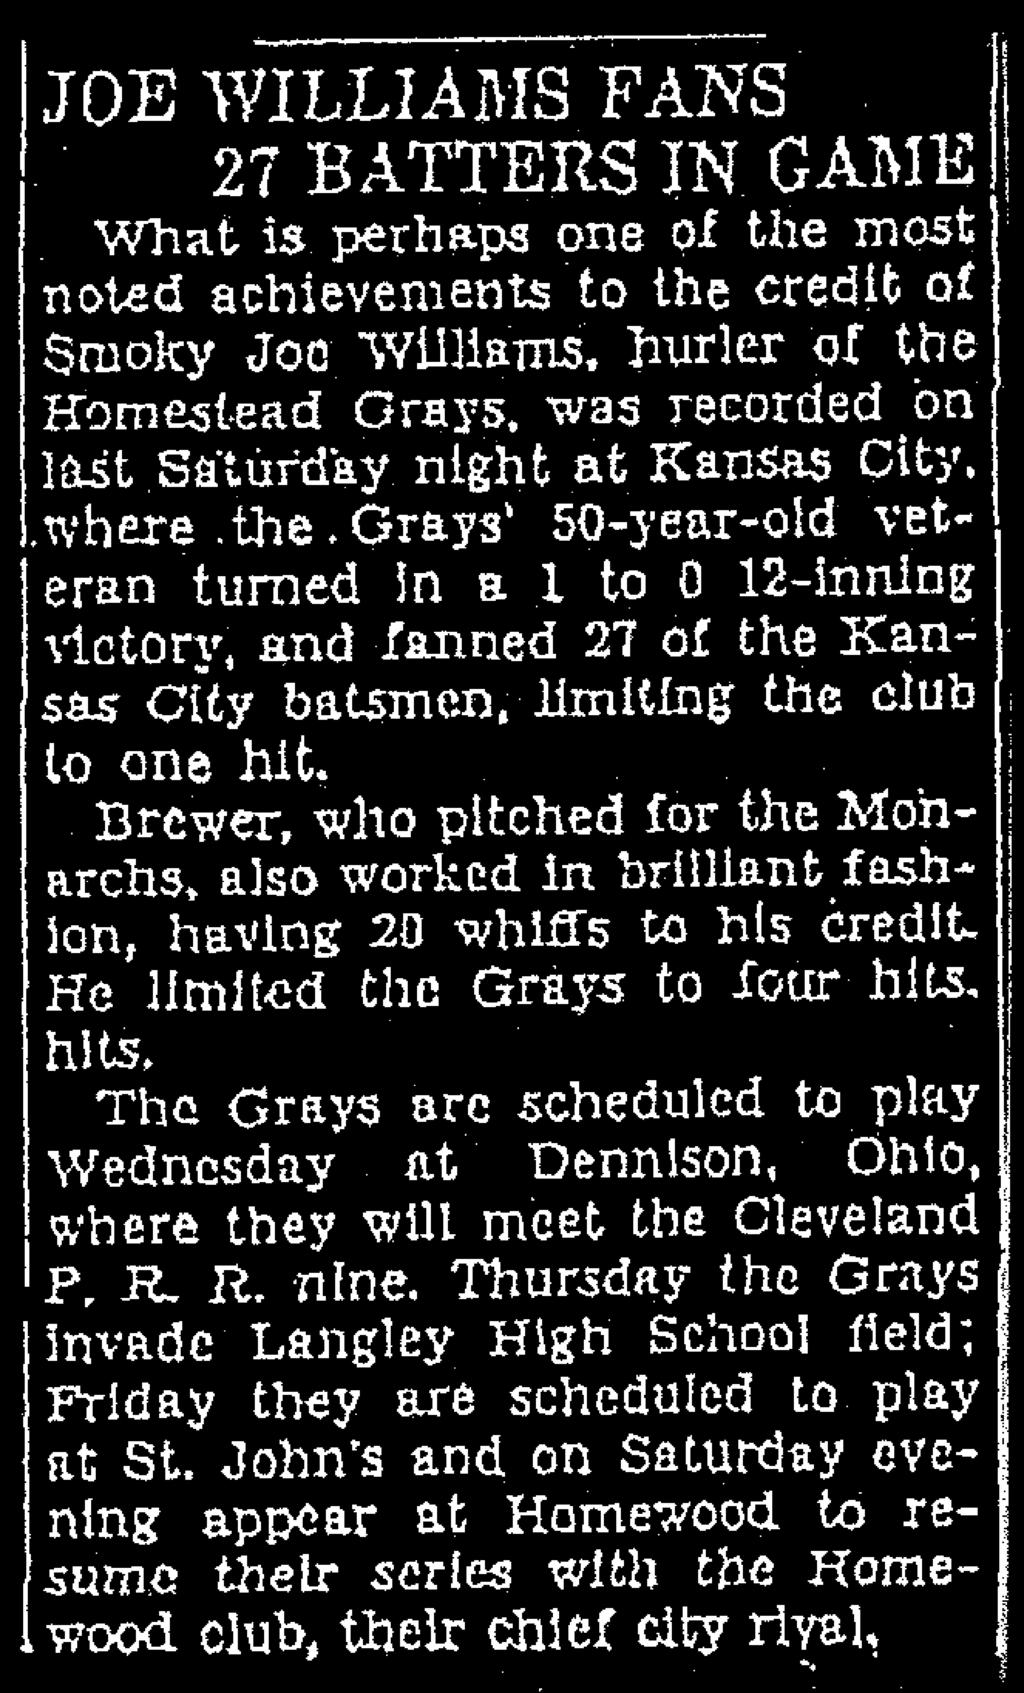 Scales collected seven hits (three singles, two doubles, one triple and one homerun) in seven at bats in the game. The Grays as a team banged out 32 hits in a 23-4 victory.